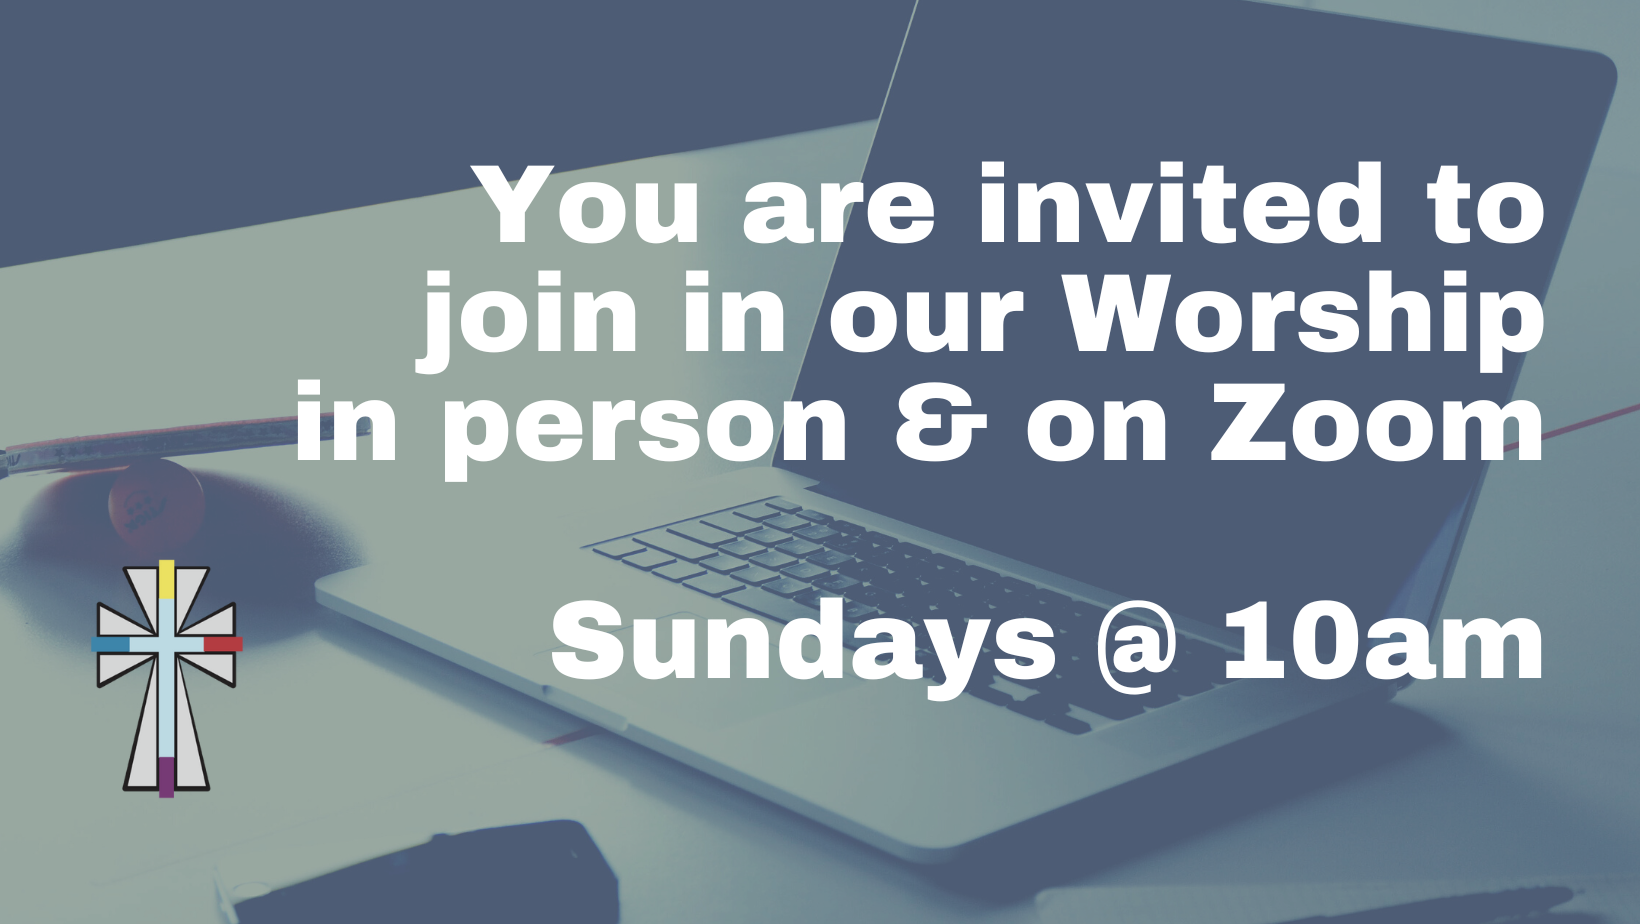 You-are-invited-to-join-in-our-worship-in-person-on-Zoom-1